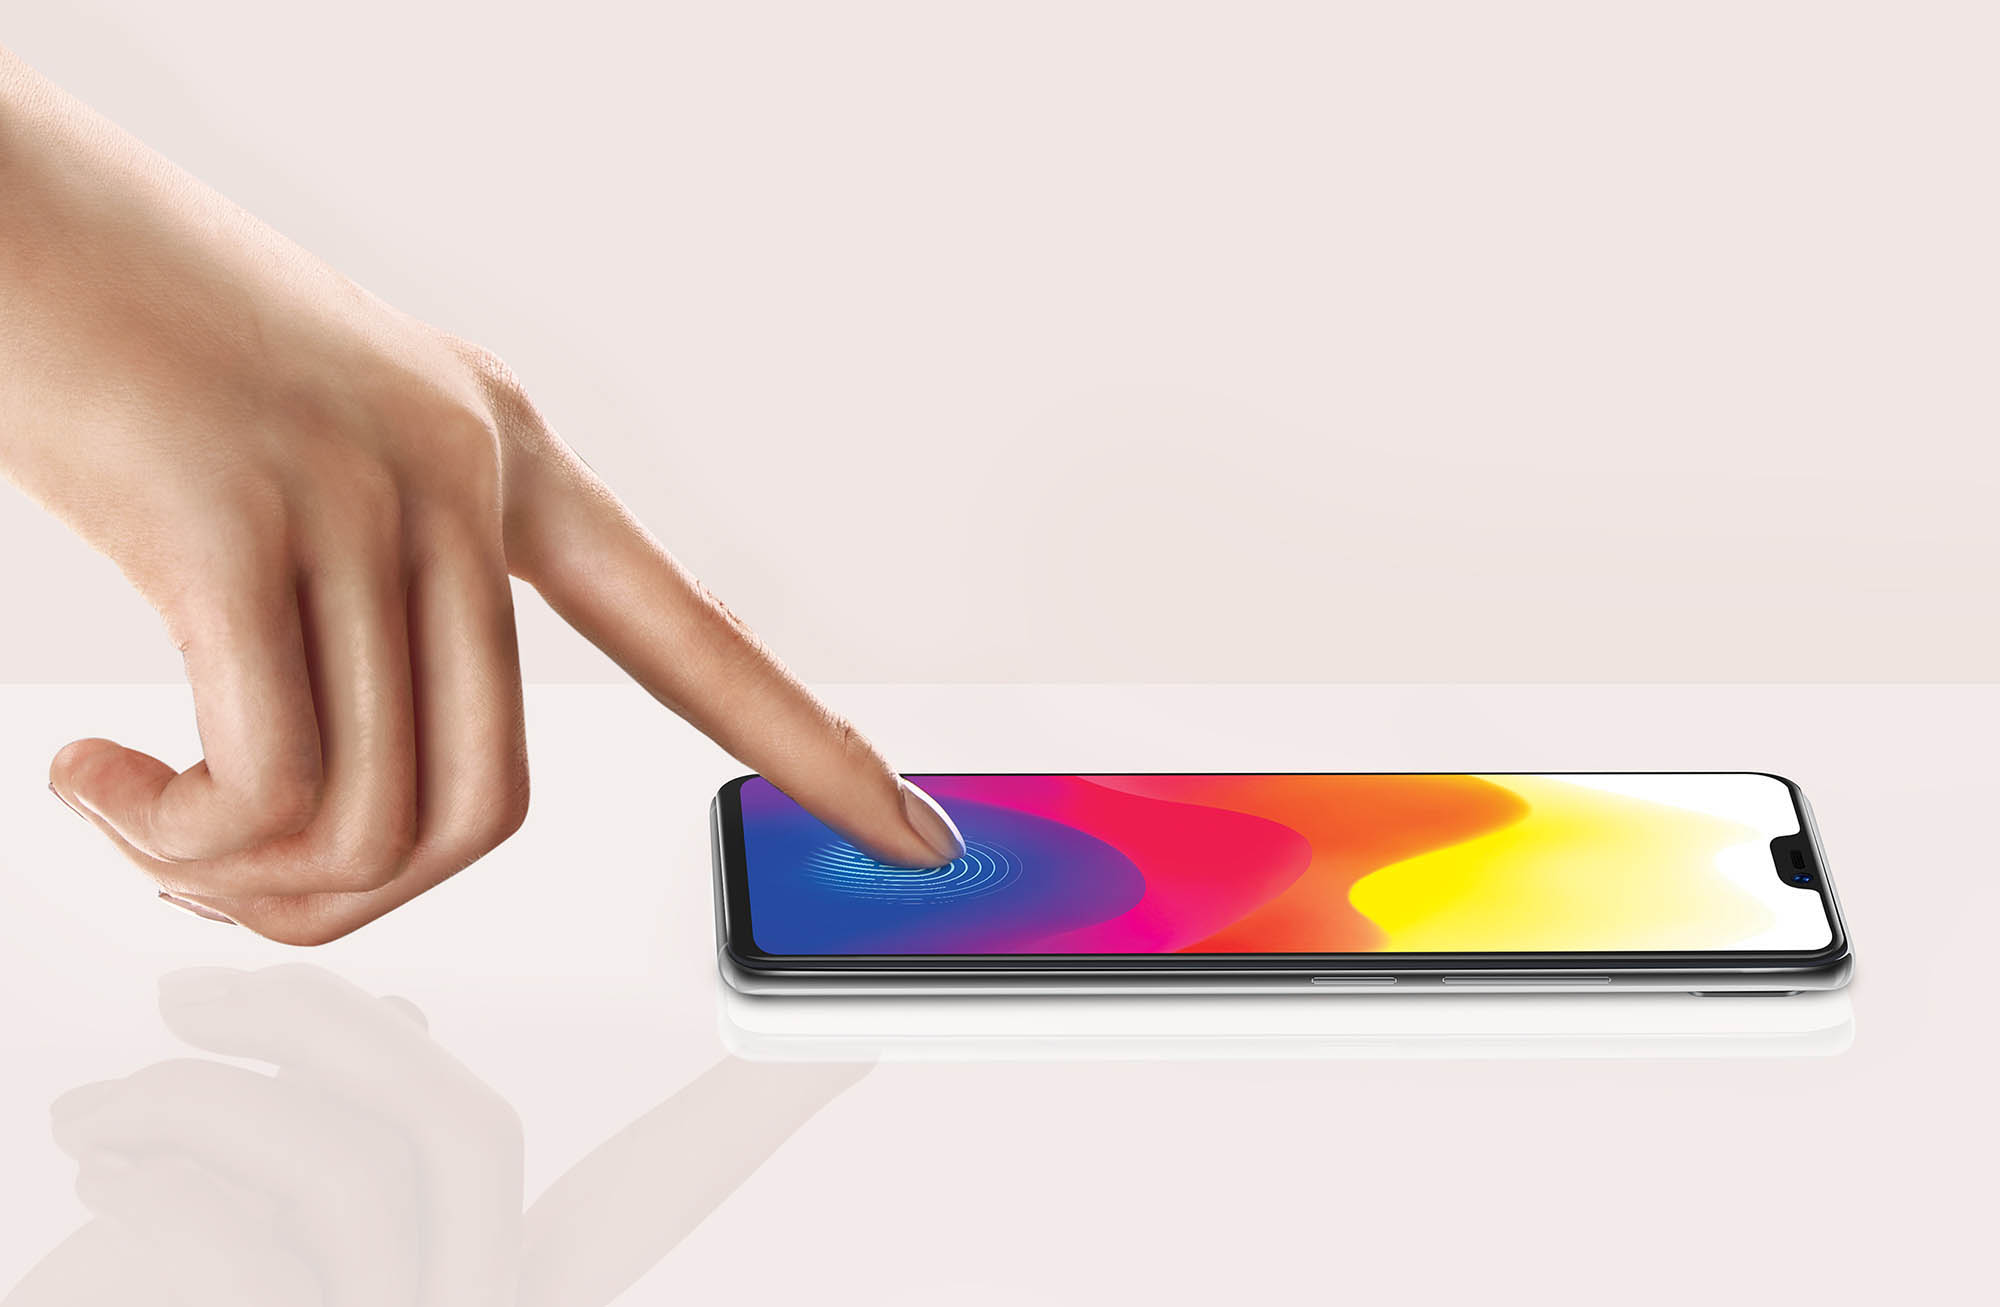 Vivo to introduce In-Display Fingerprint Scanning Technology in PHL